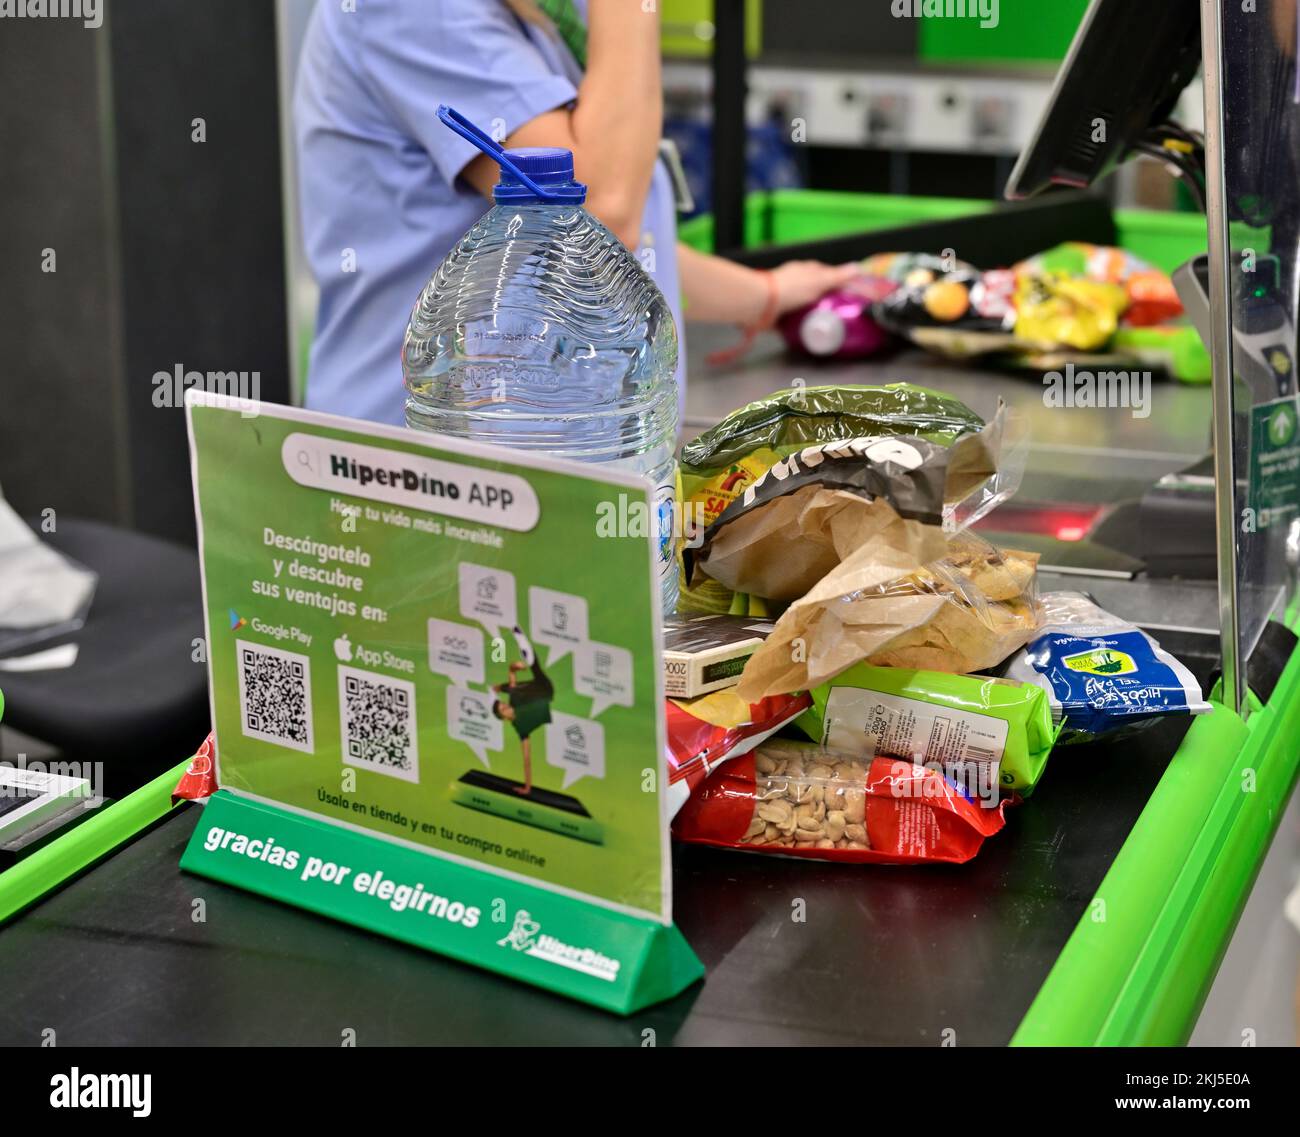 Check out counter at a HiperDino supermarket with food items on conveyor belt before staff at till Stock Photo